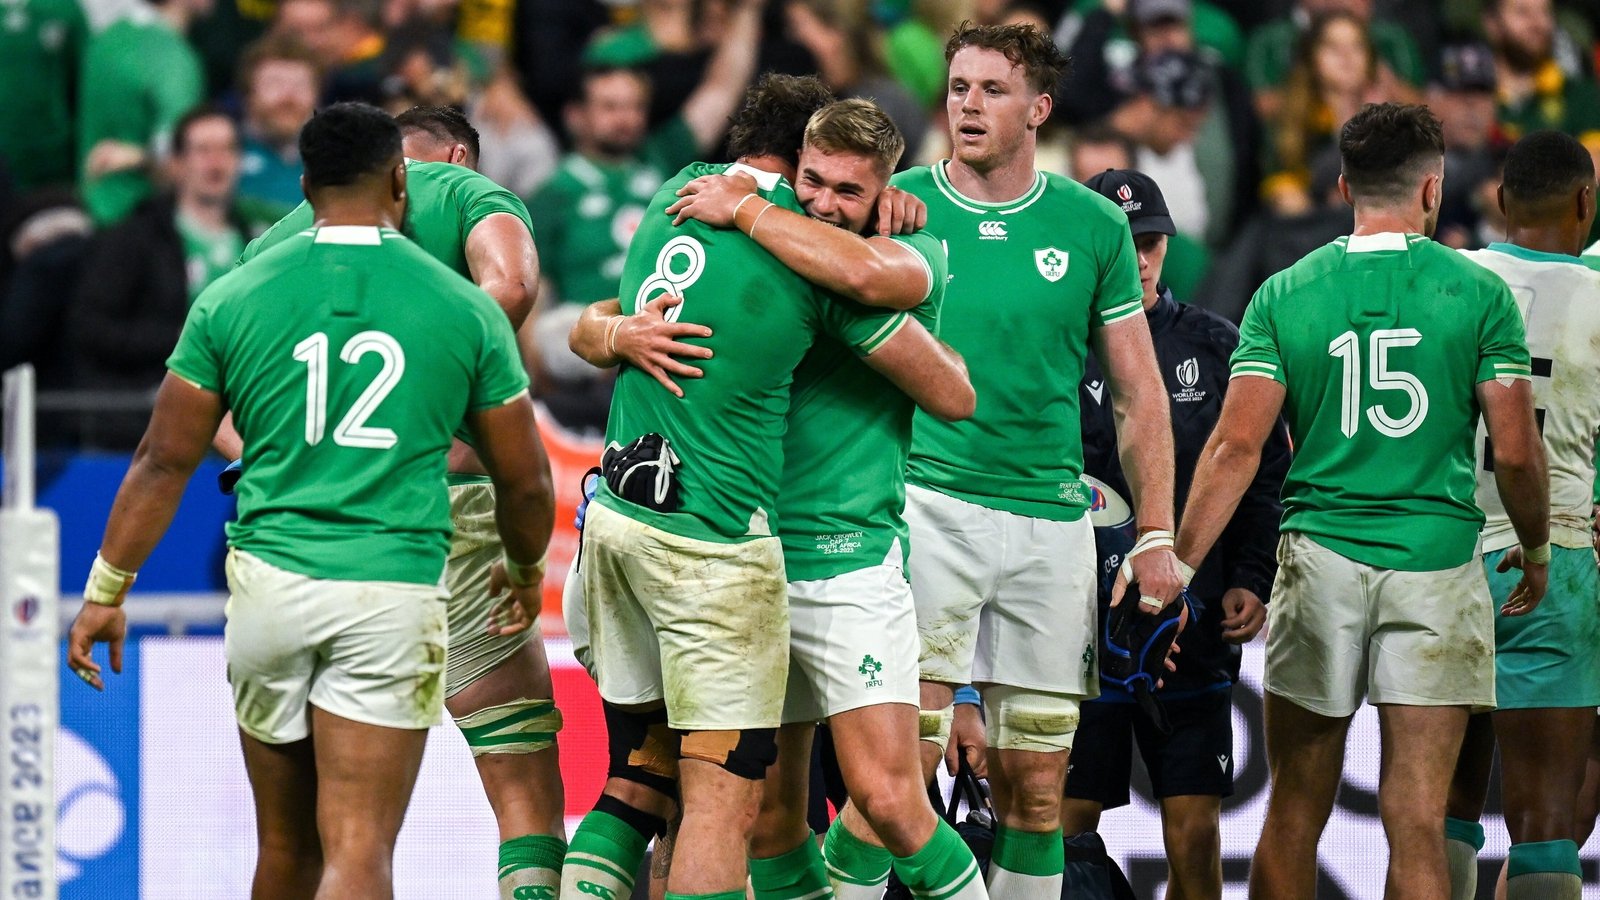 RWC Ireland dig deep to hold off the Boks